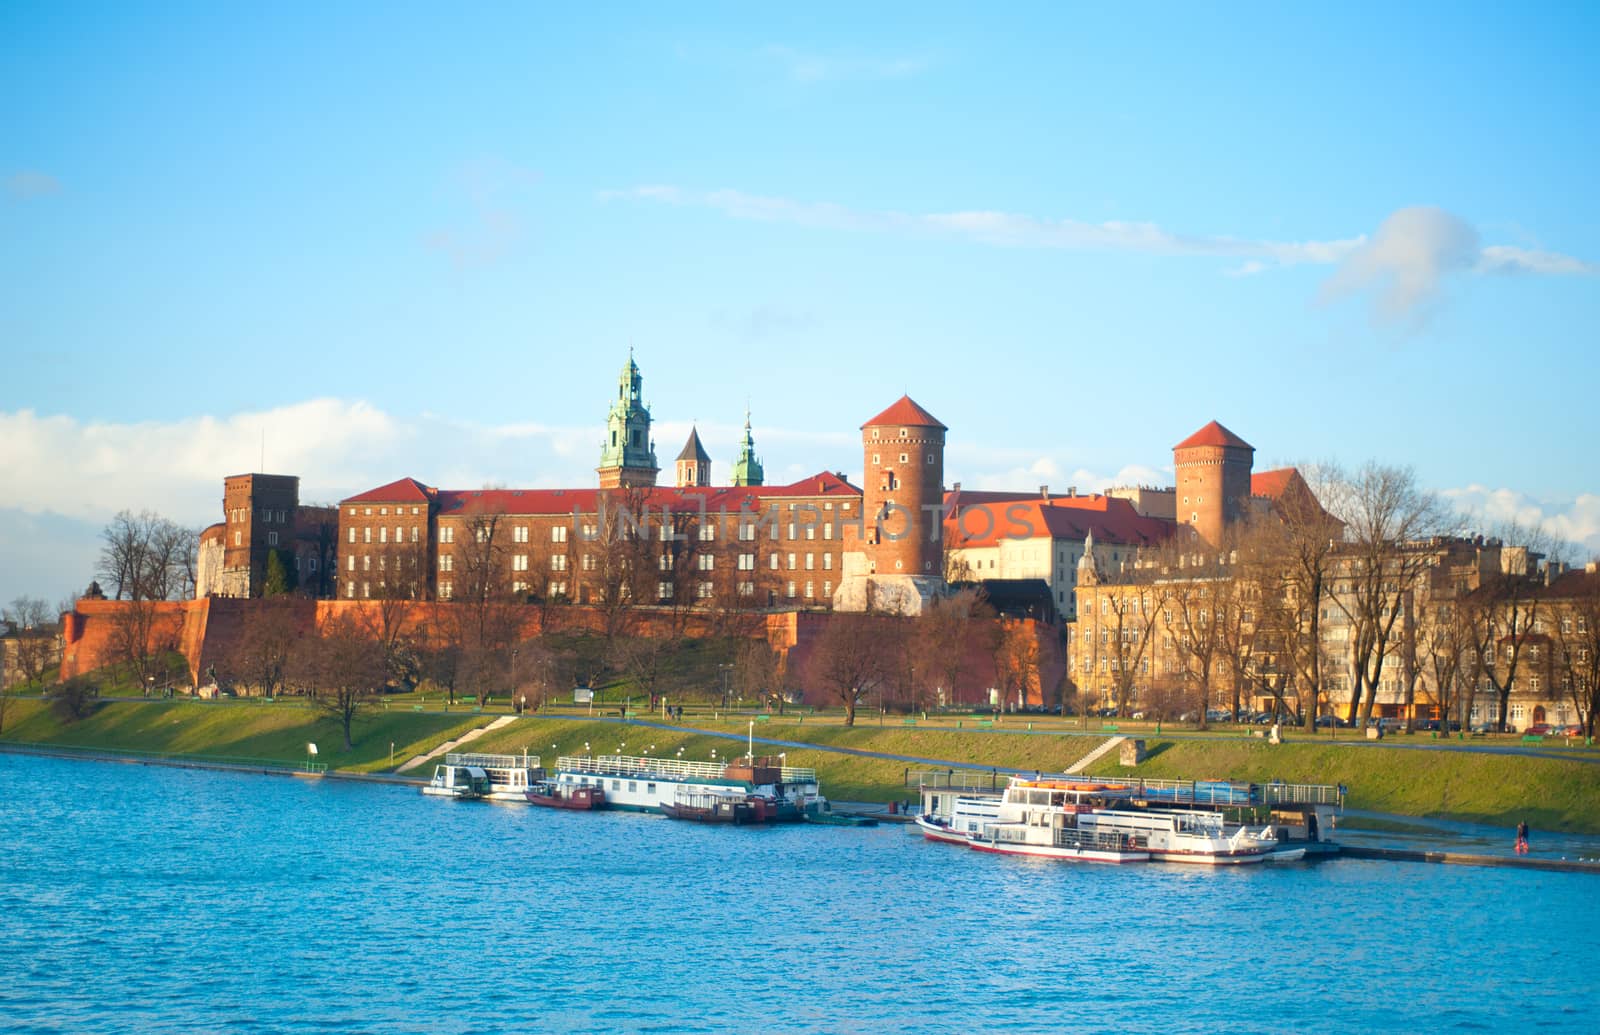 View of Wawel Castle at sunset in Krakow, Poland